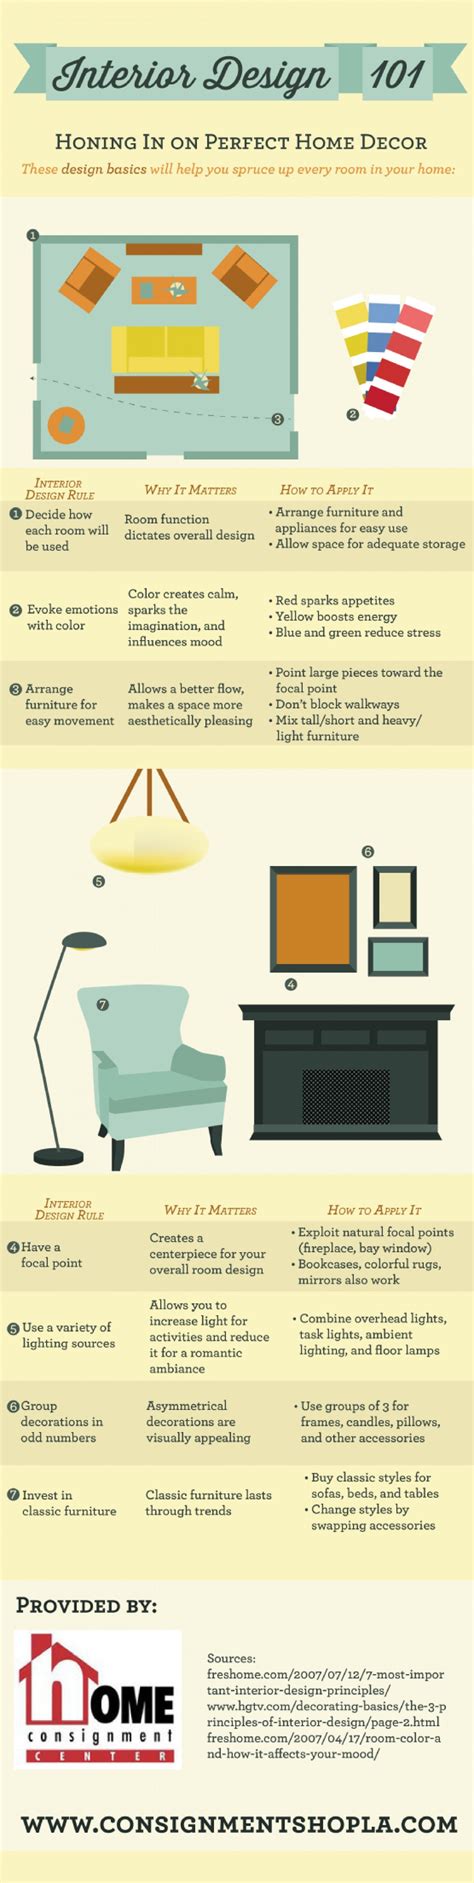 Interior Design 101 Honing In On The Perfect Home Decor Infographic